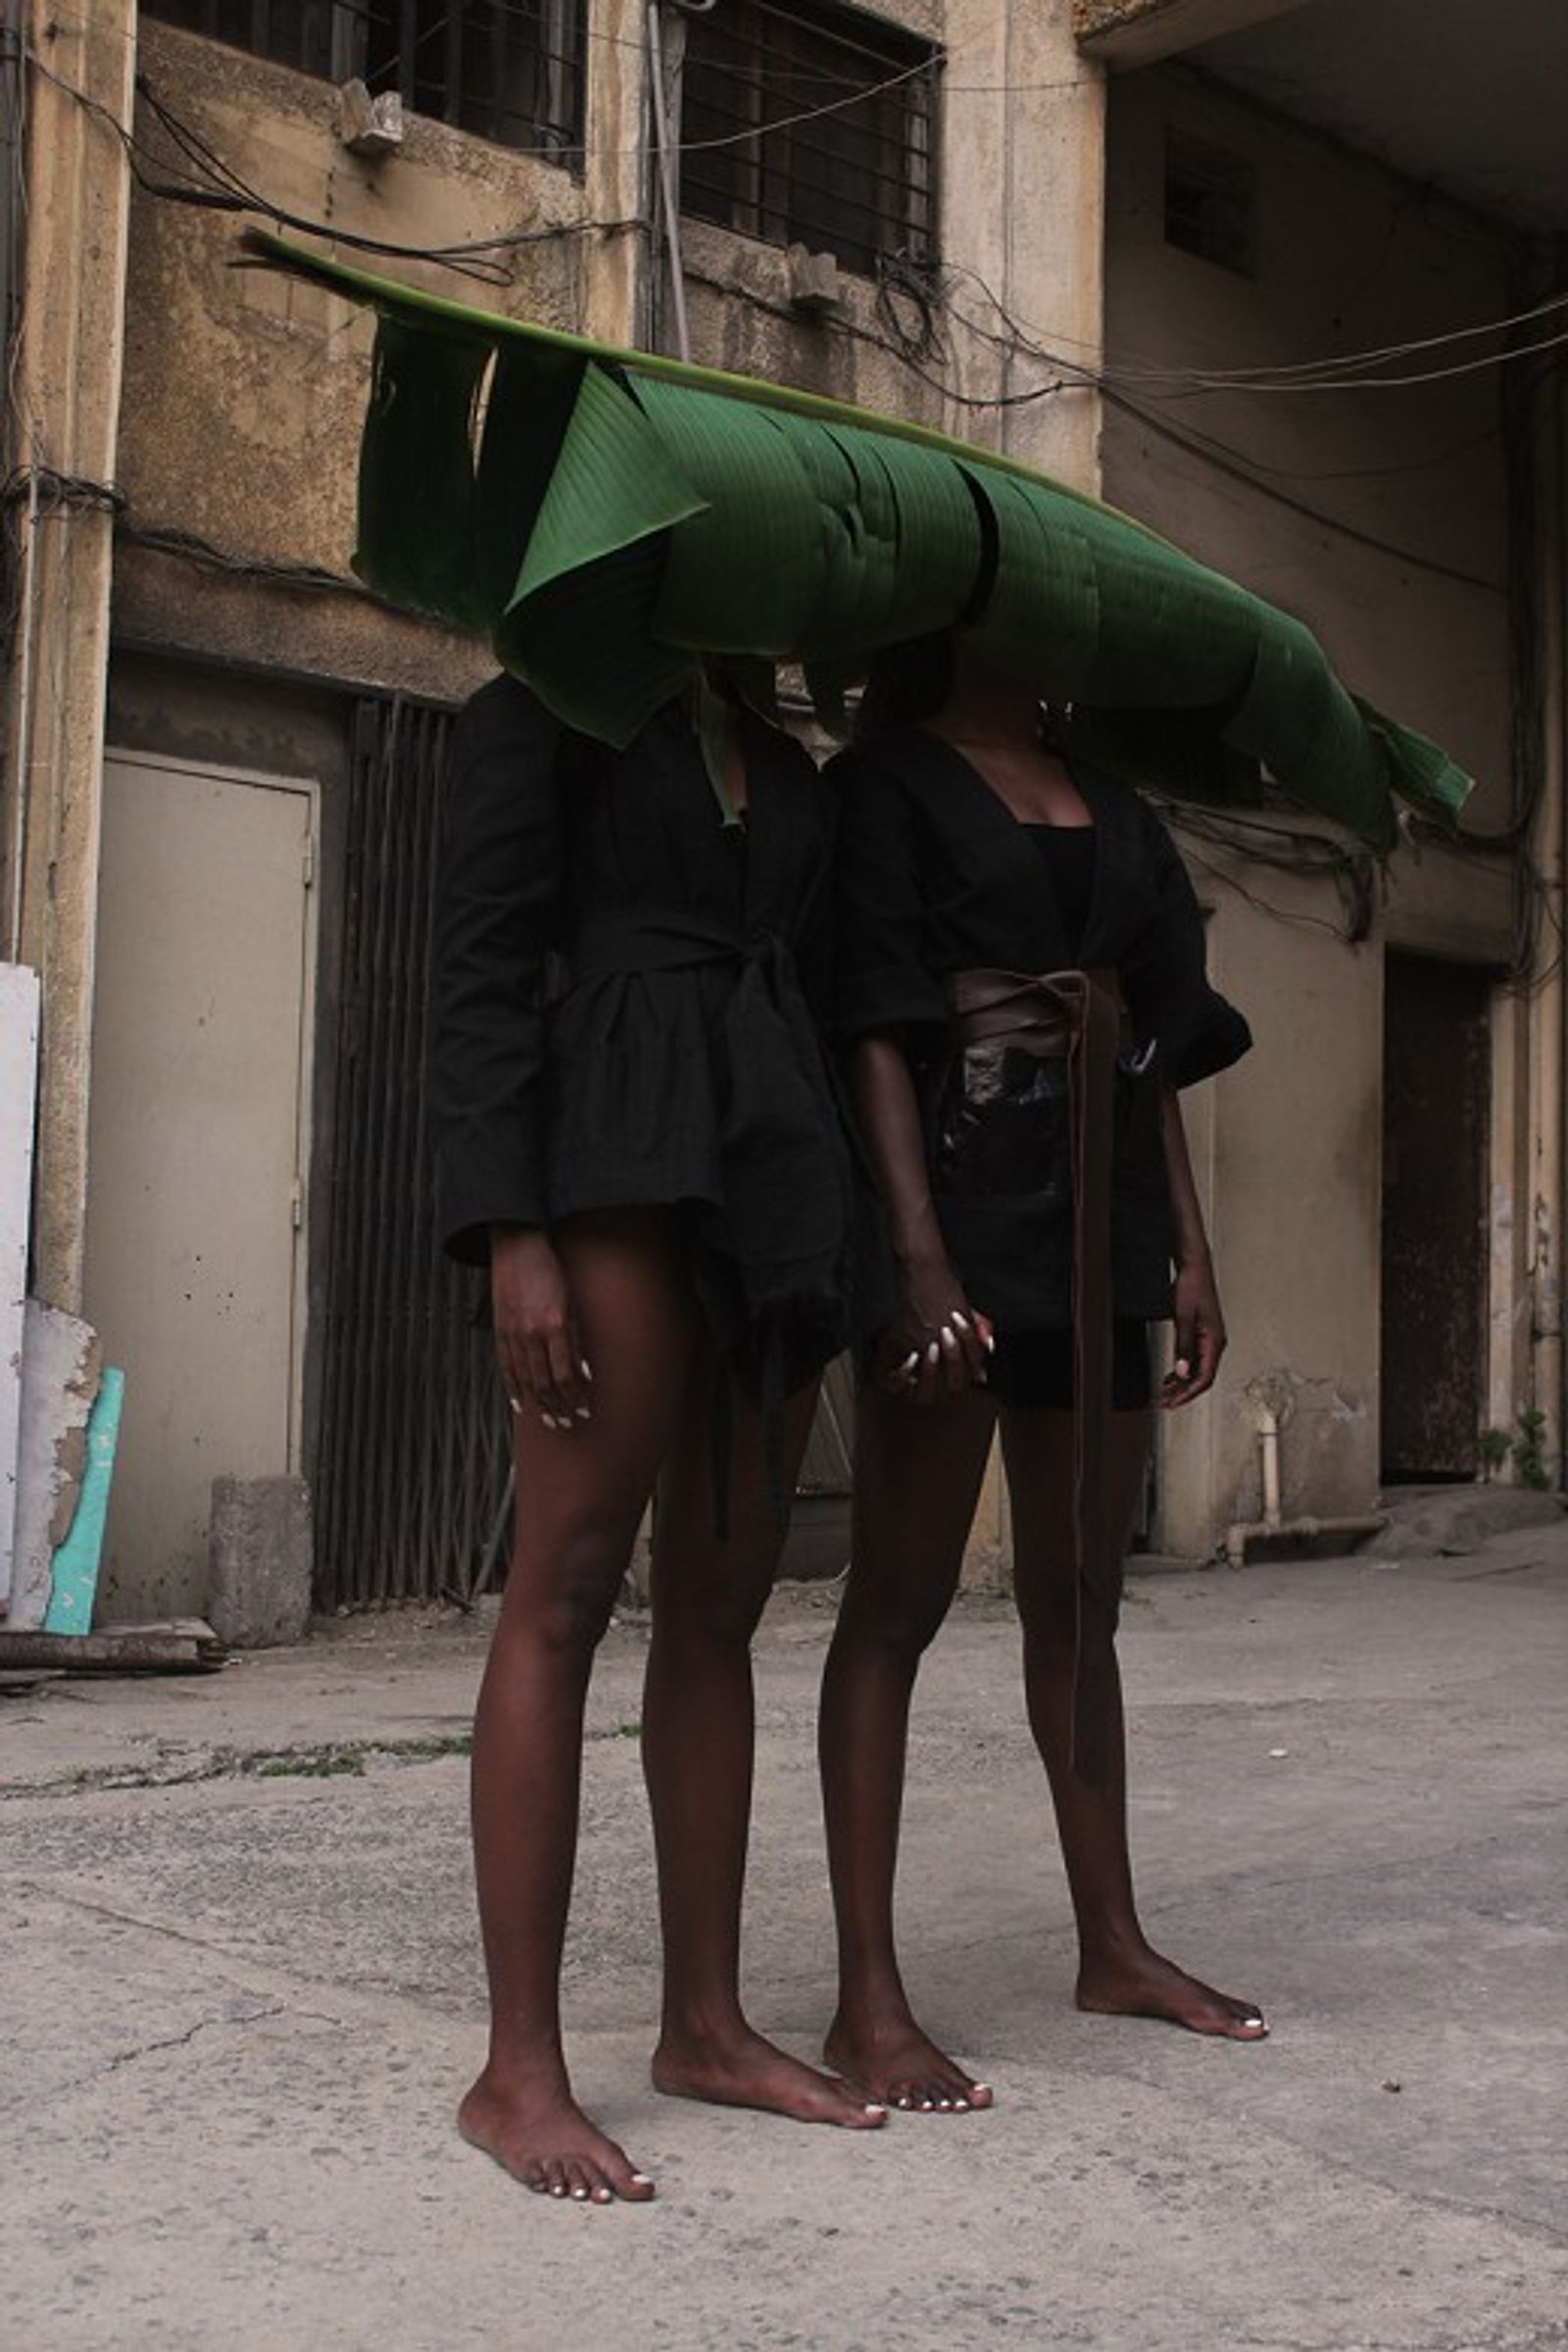 © Tara Koffi - Image from the Afropolitan kids photography project